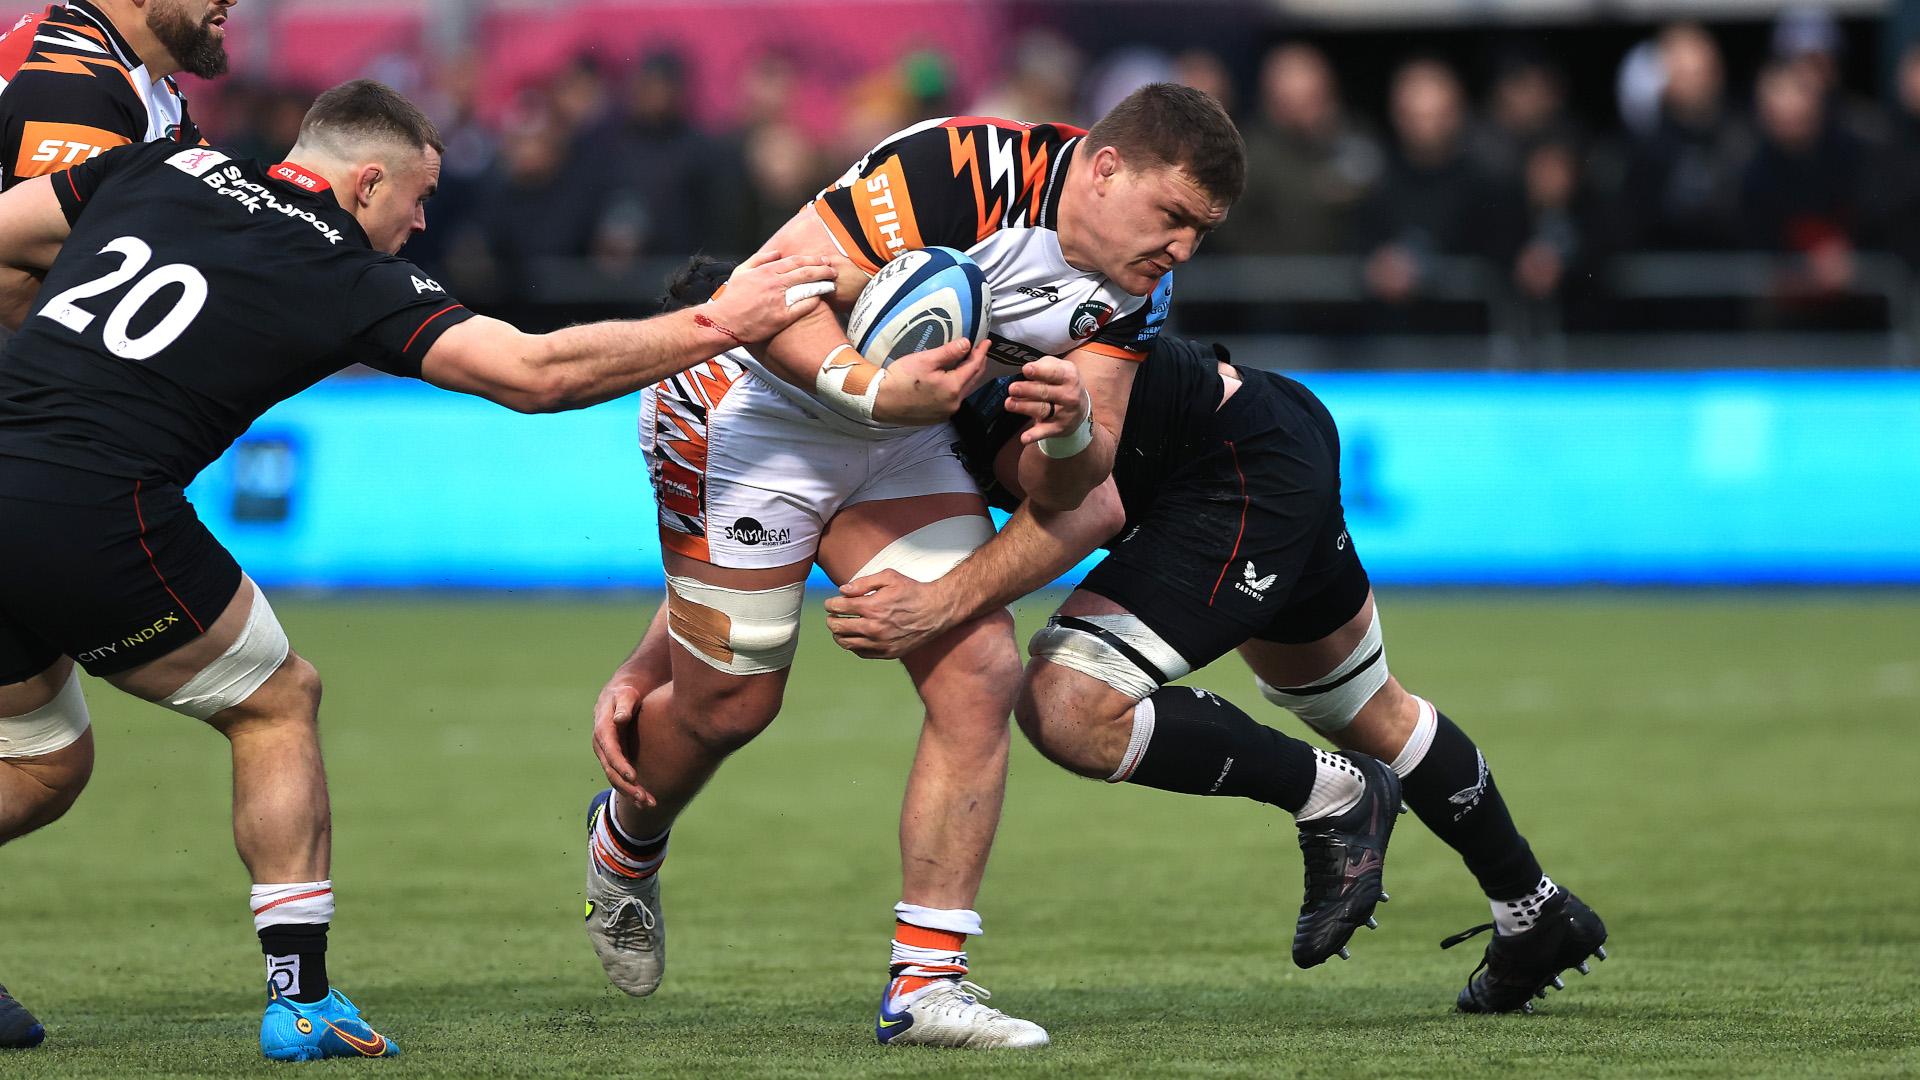 watch live premiership rugby union online